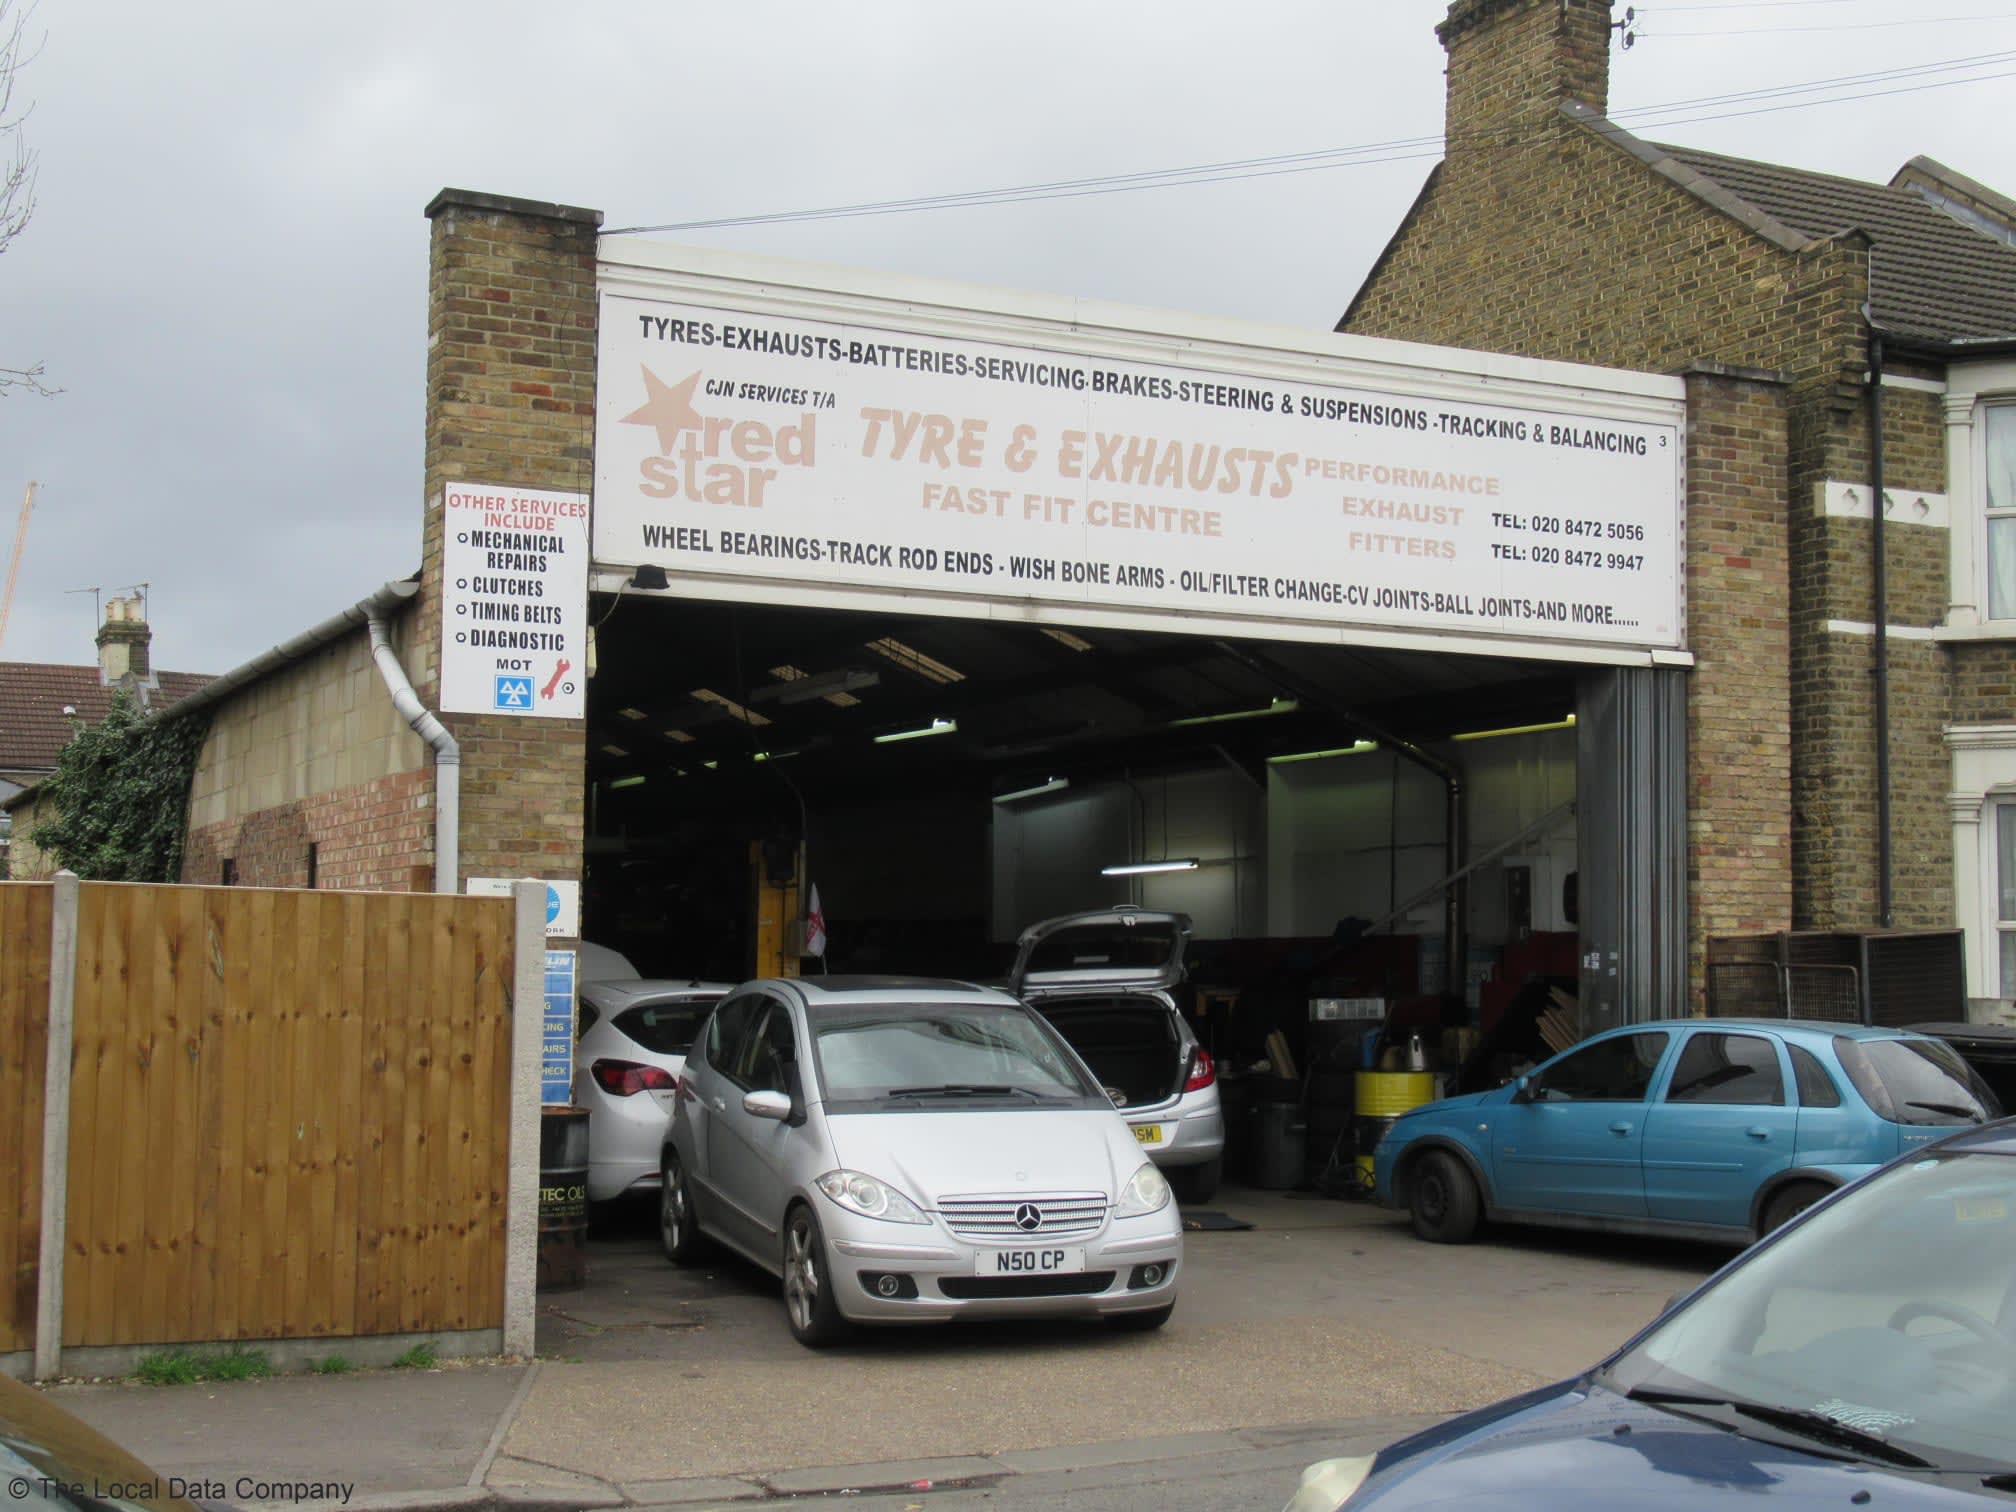 Images Red Star Tyres & Exhaust Centre